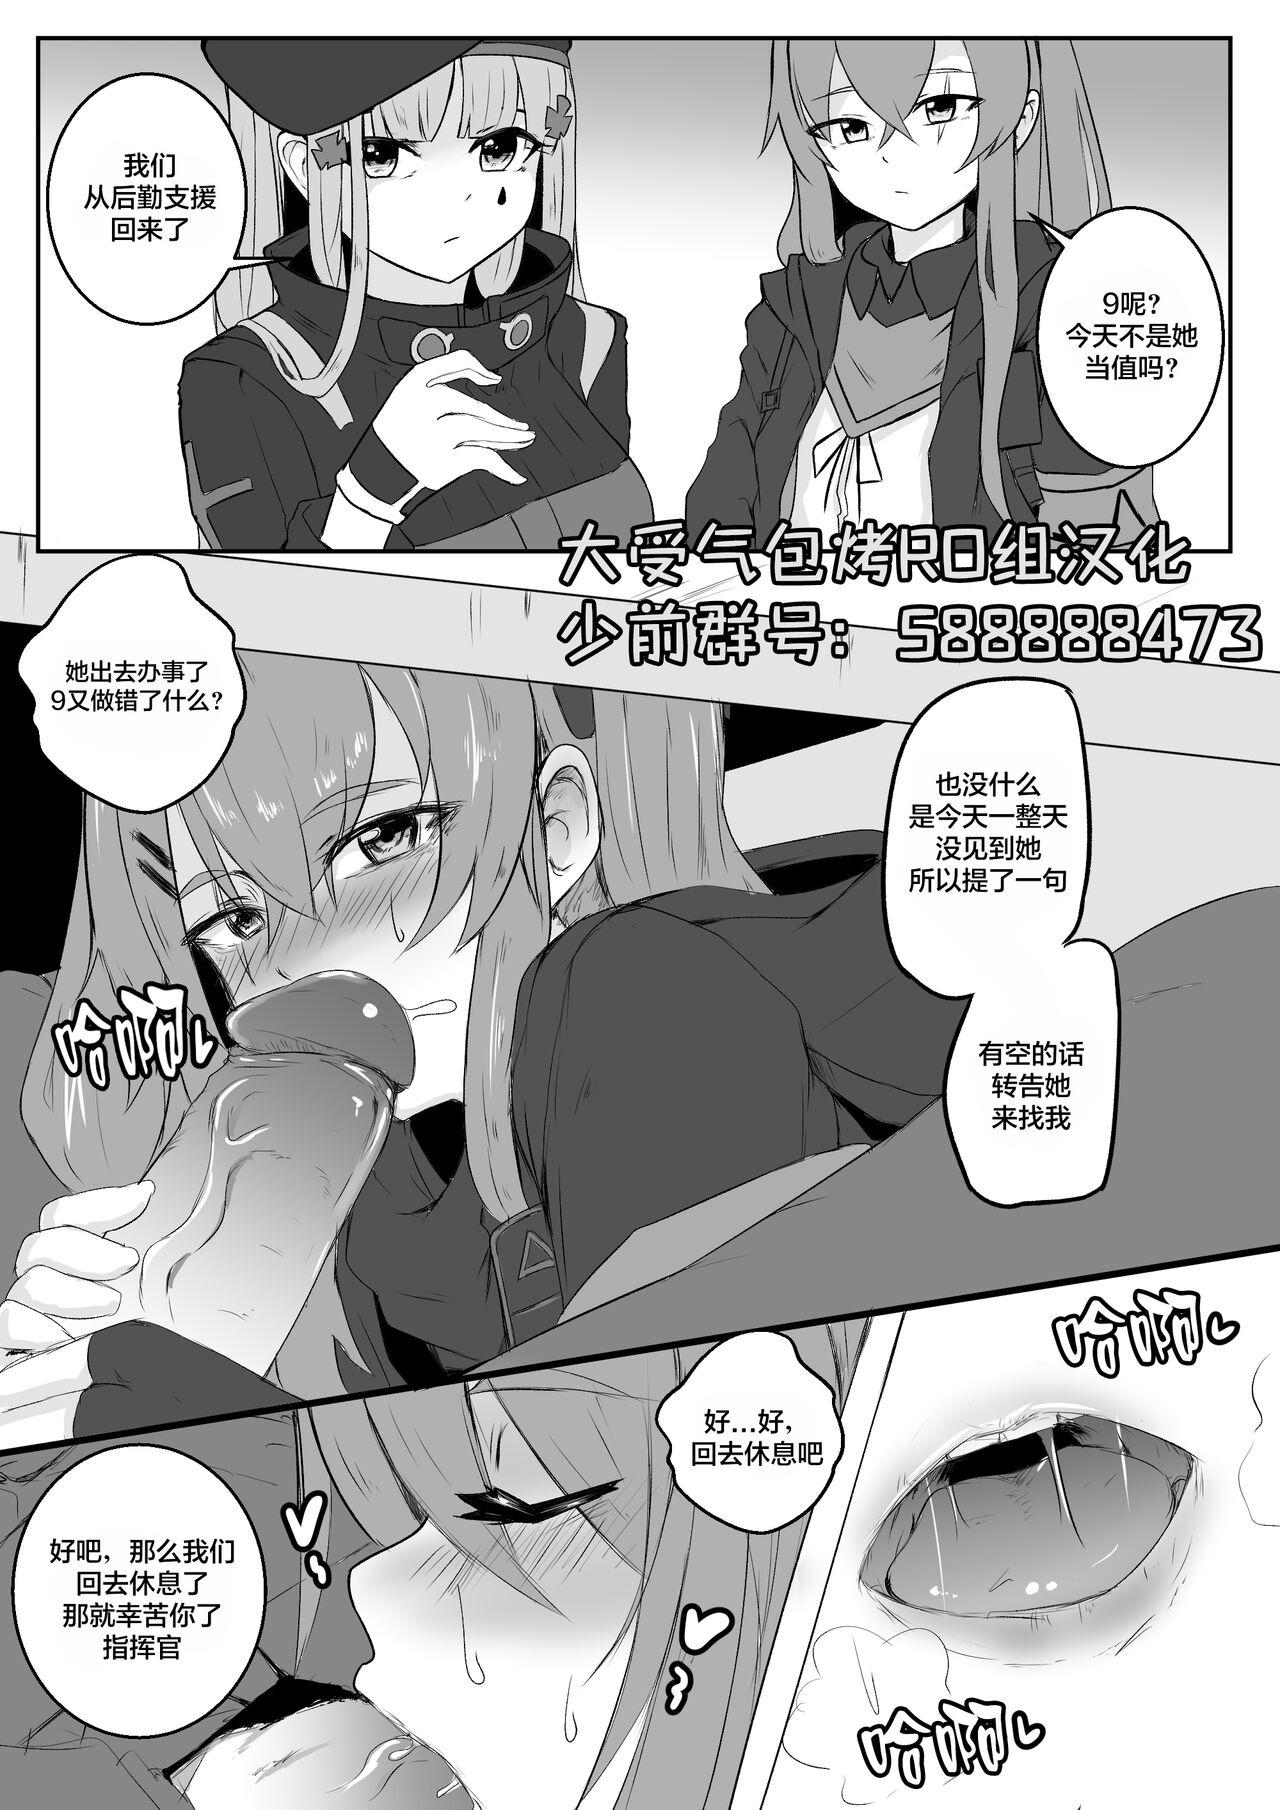 Leche UMP9, UMP45 - Girls frontline Spooning - Page 1